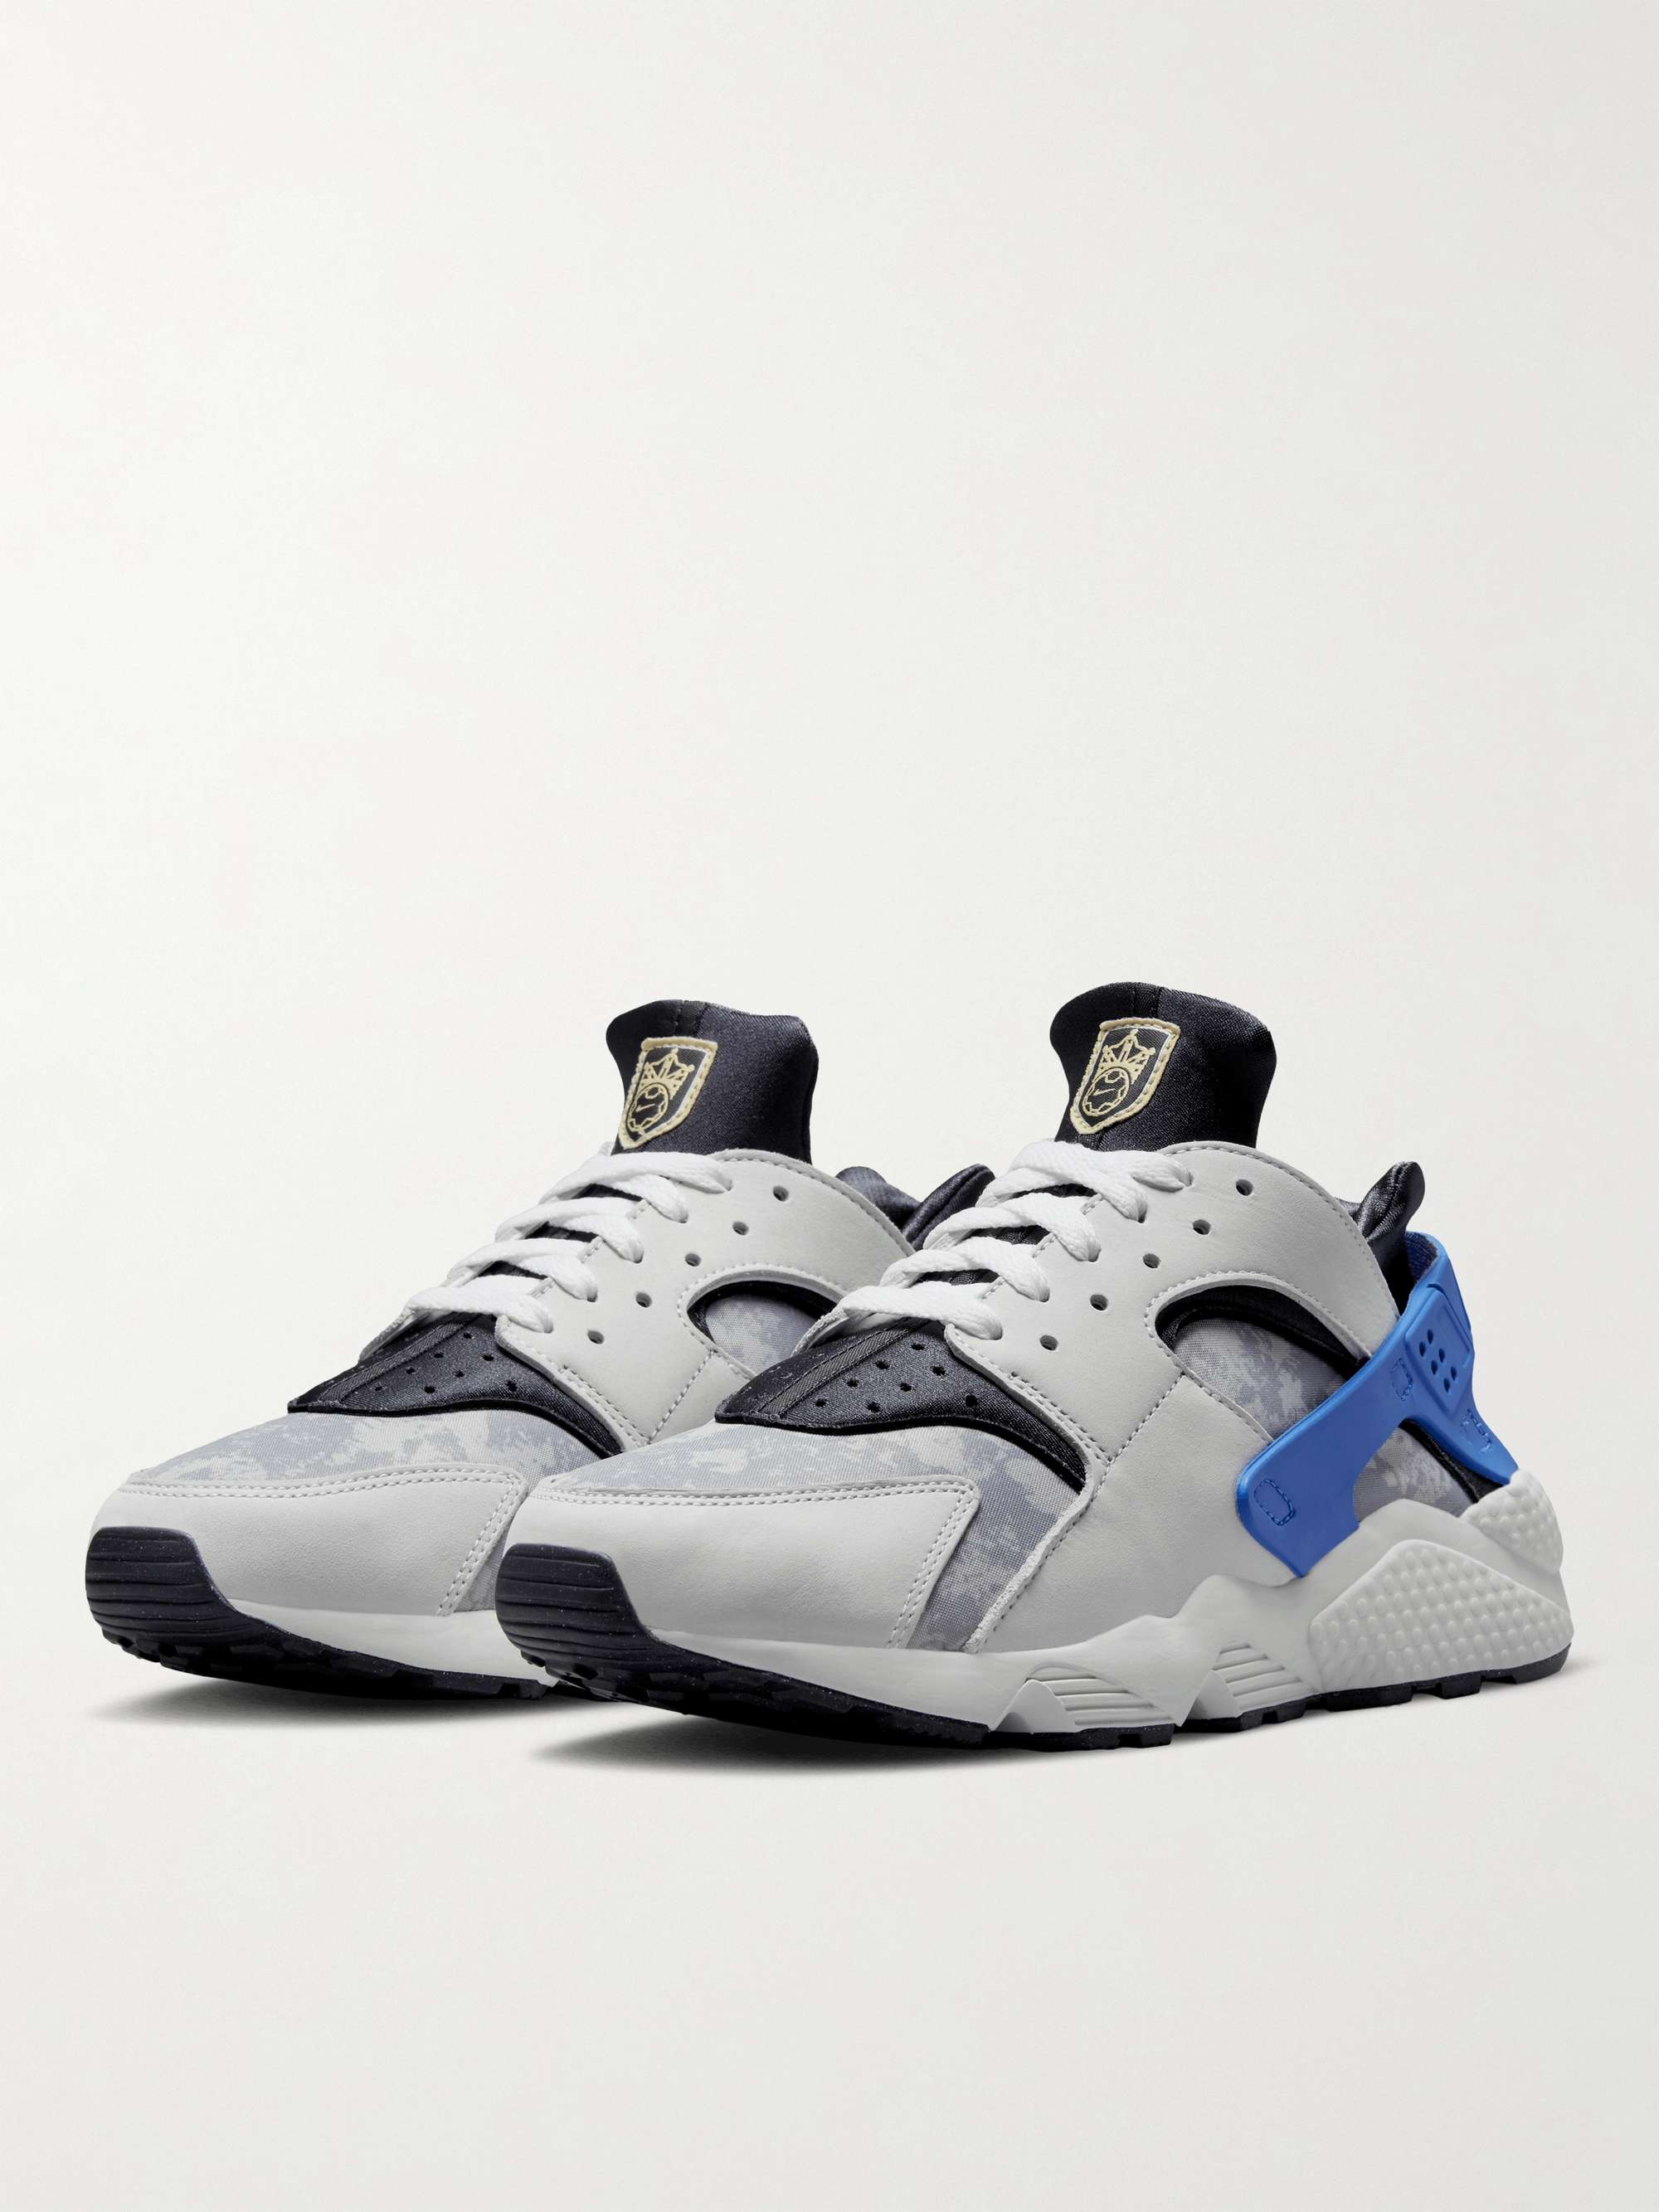 Contract salade drie NIKE Air Huarache PRM Leather and Rubber-Trimmed Neoprene Sneakers for Men  | MR PORTER